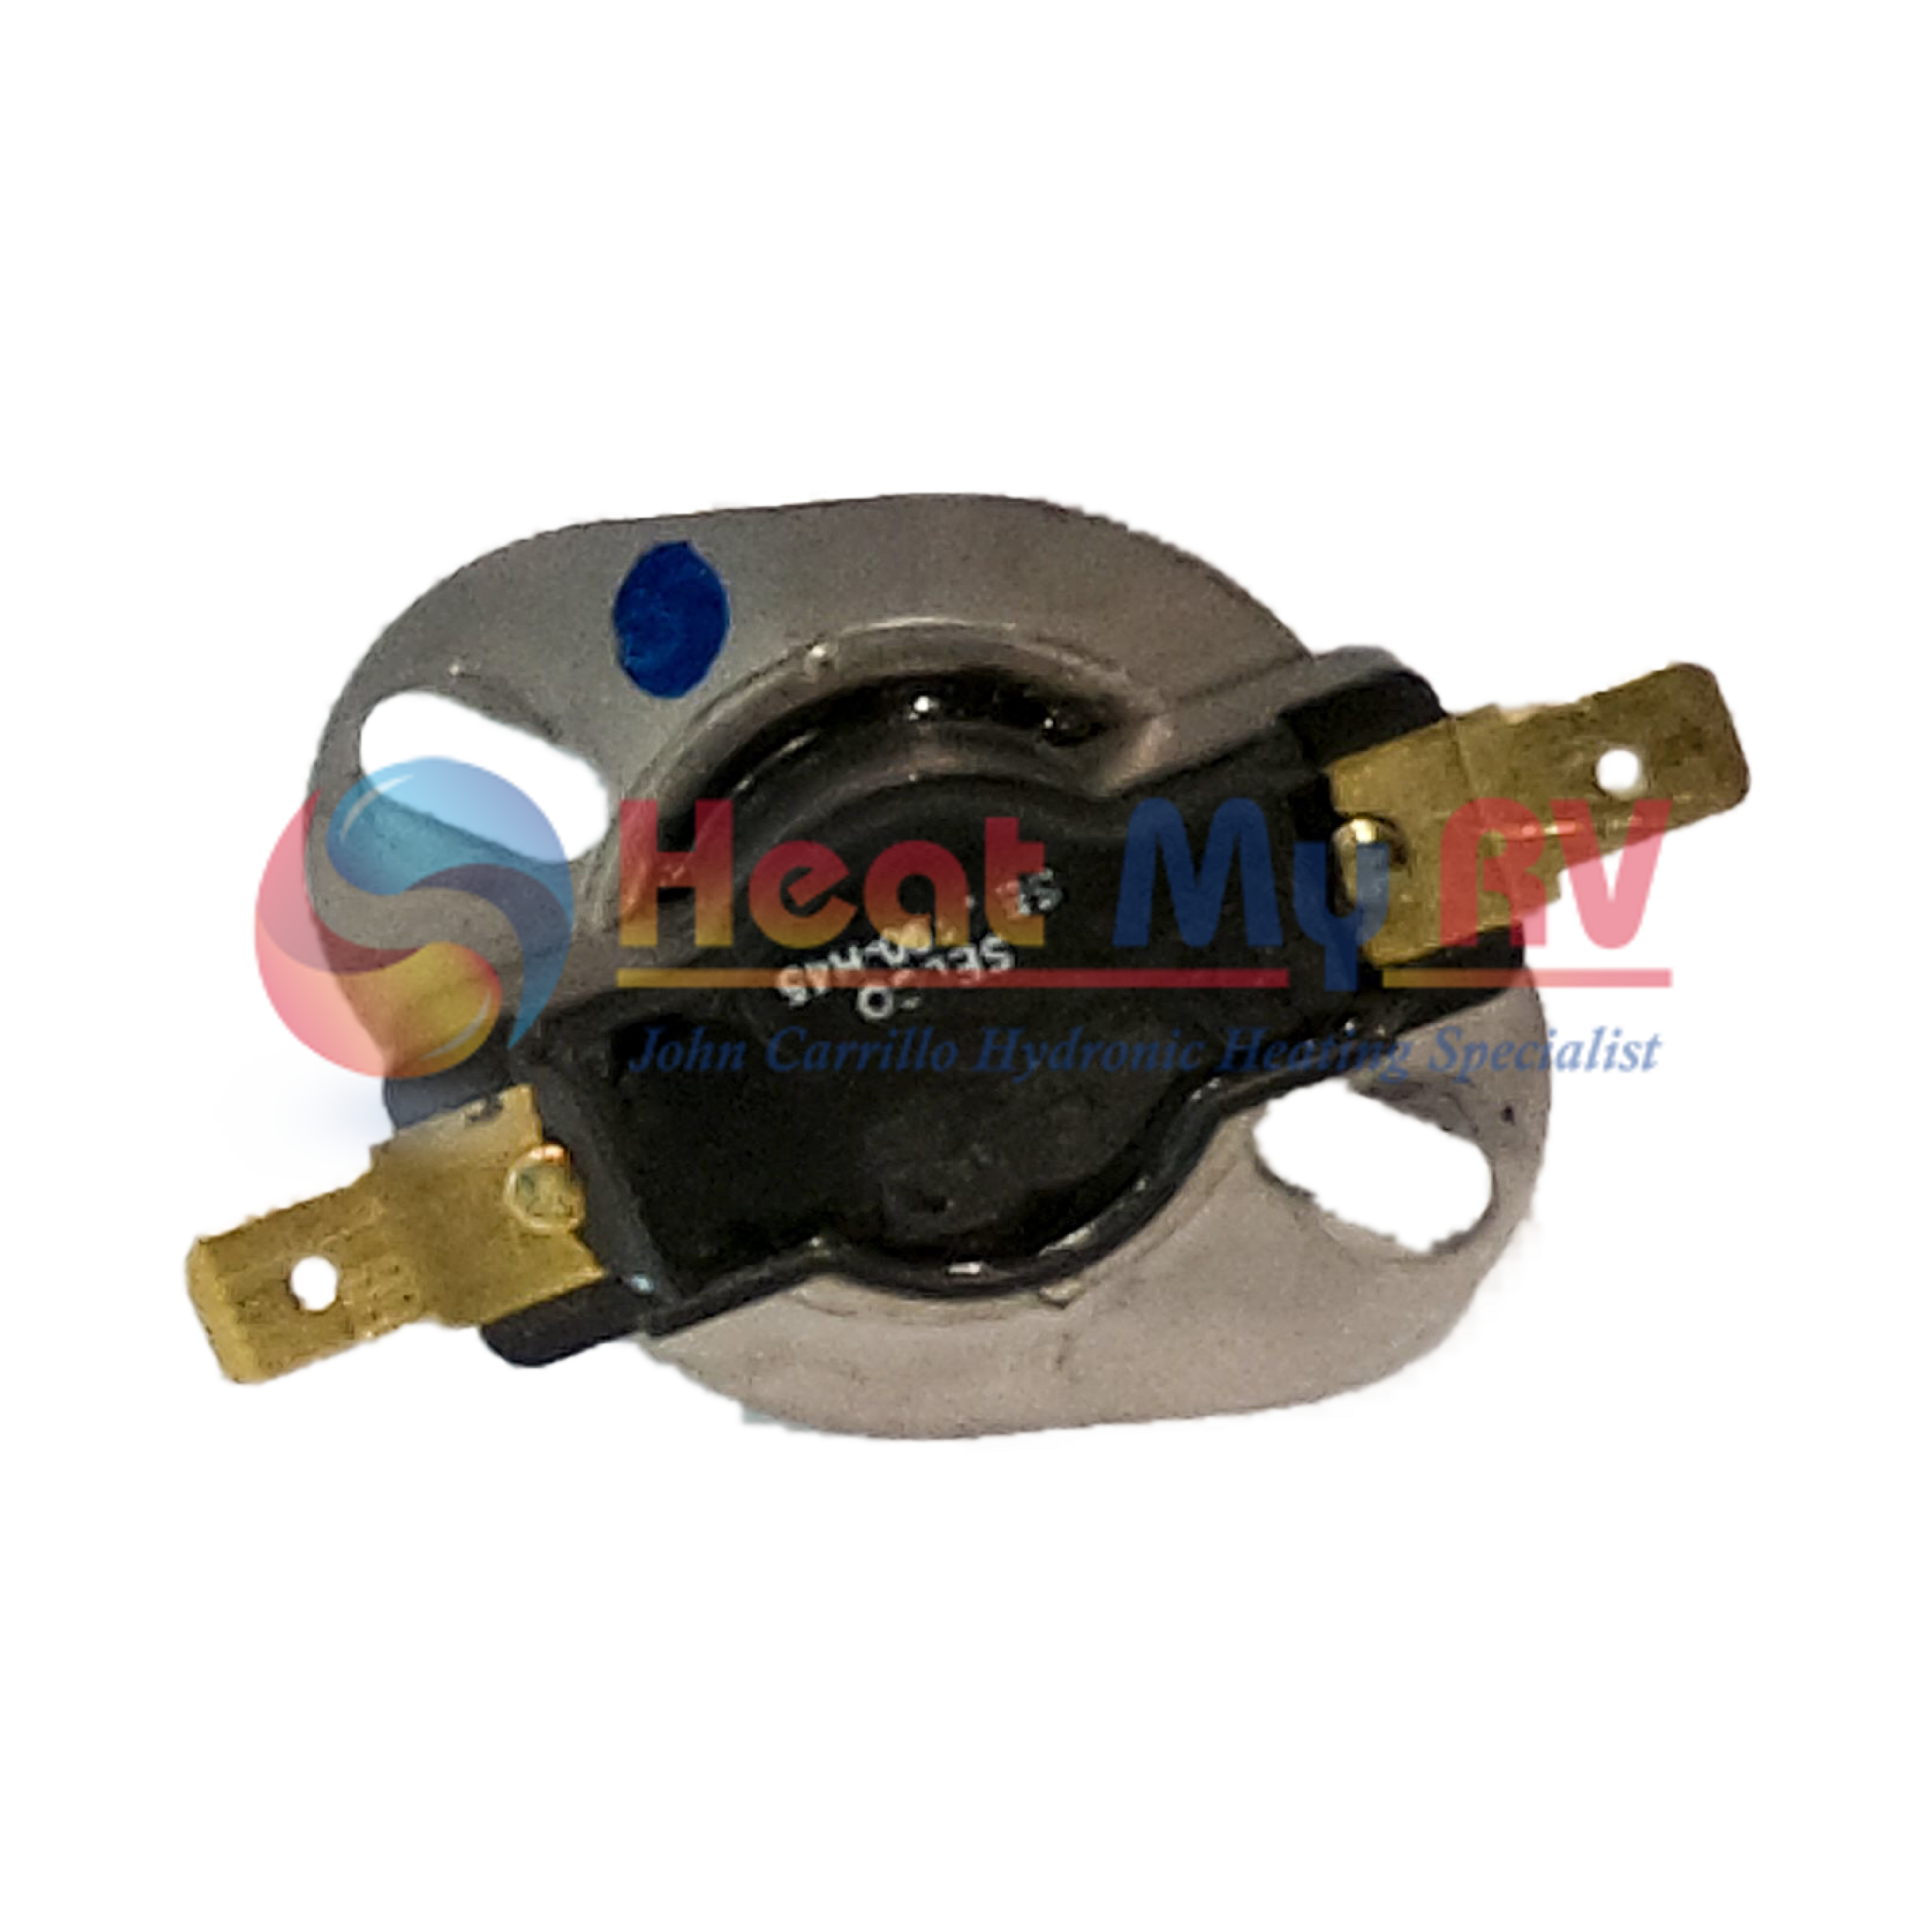 Model HWT250 Hot Water Thermometer